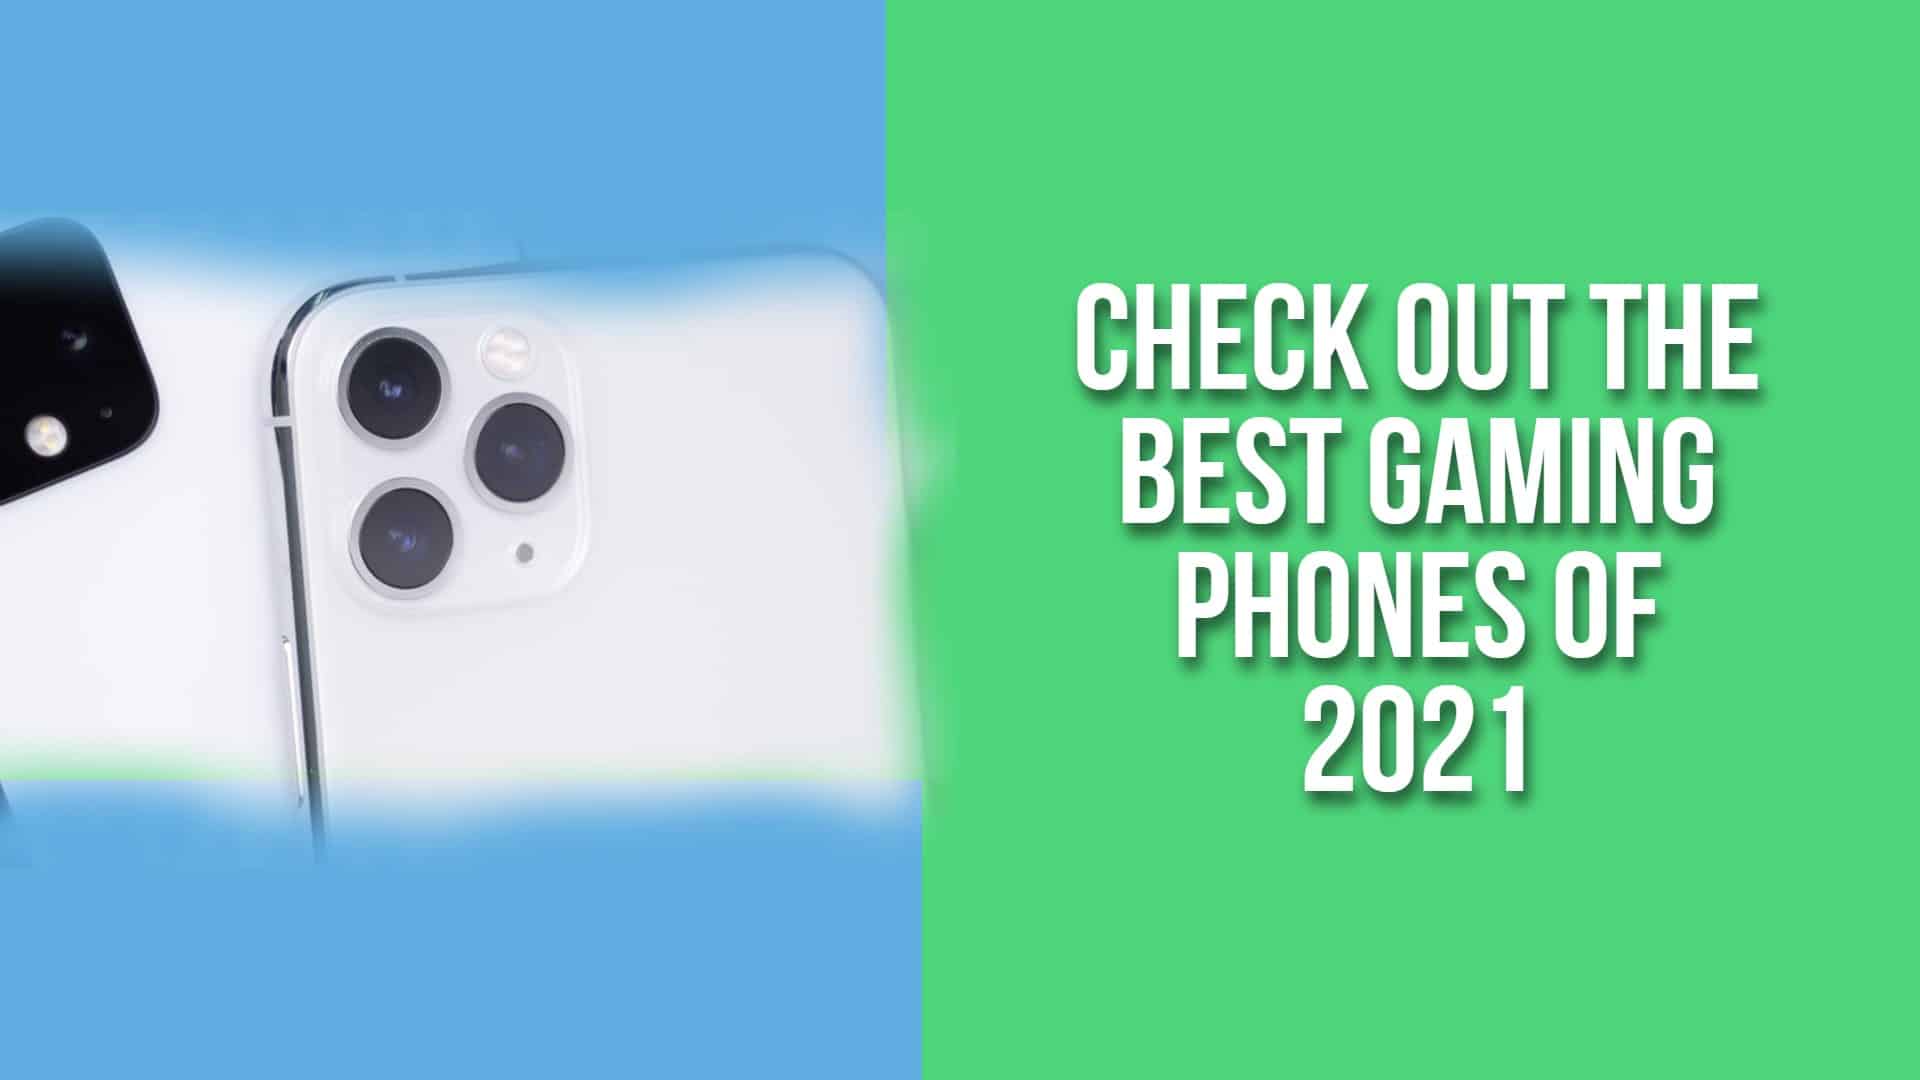 Check Out the Best Gaming Phones of 2021